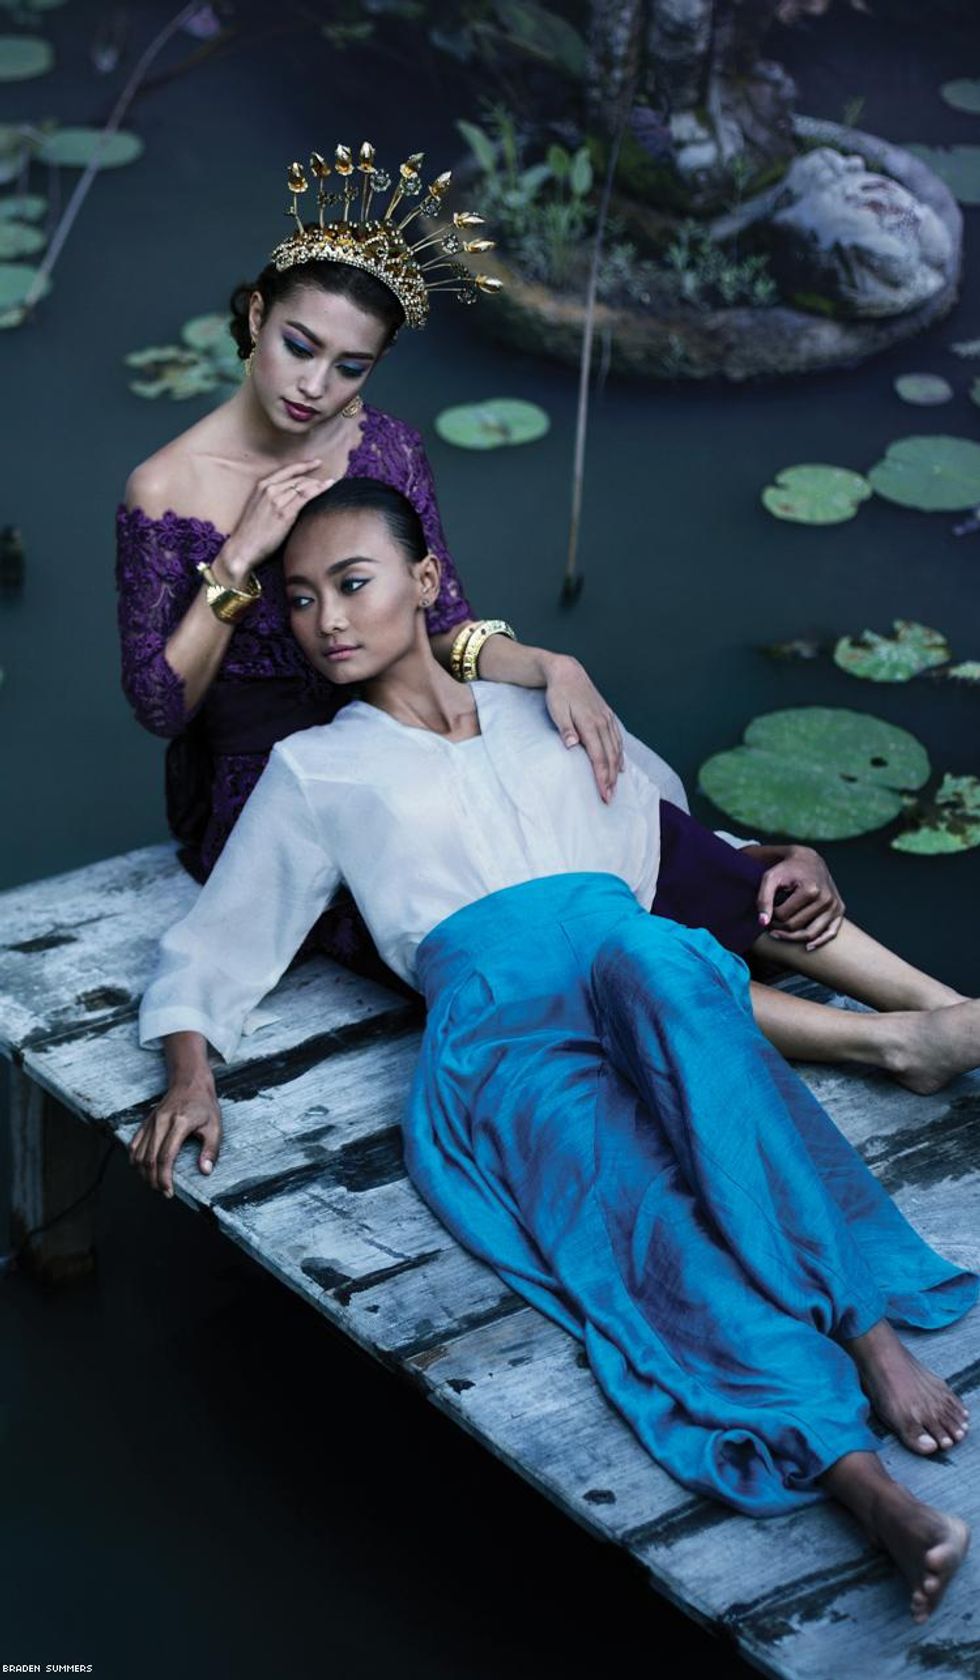 two women together on pond in Bali Indonesia by Braden Summers